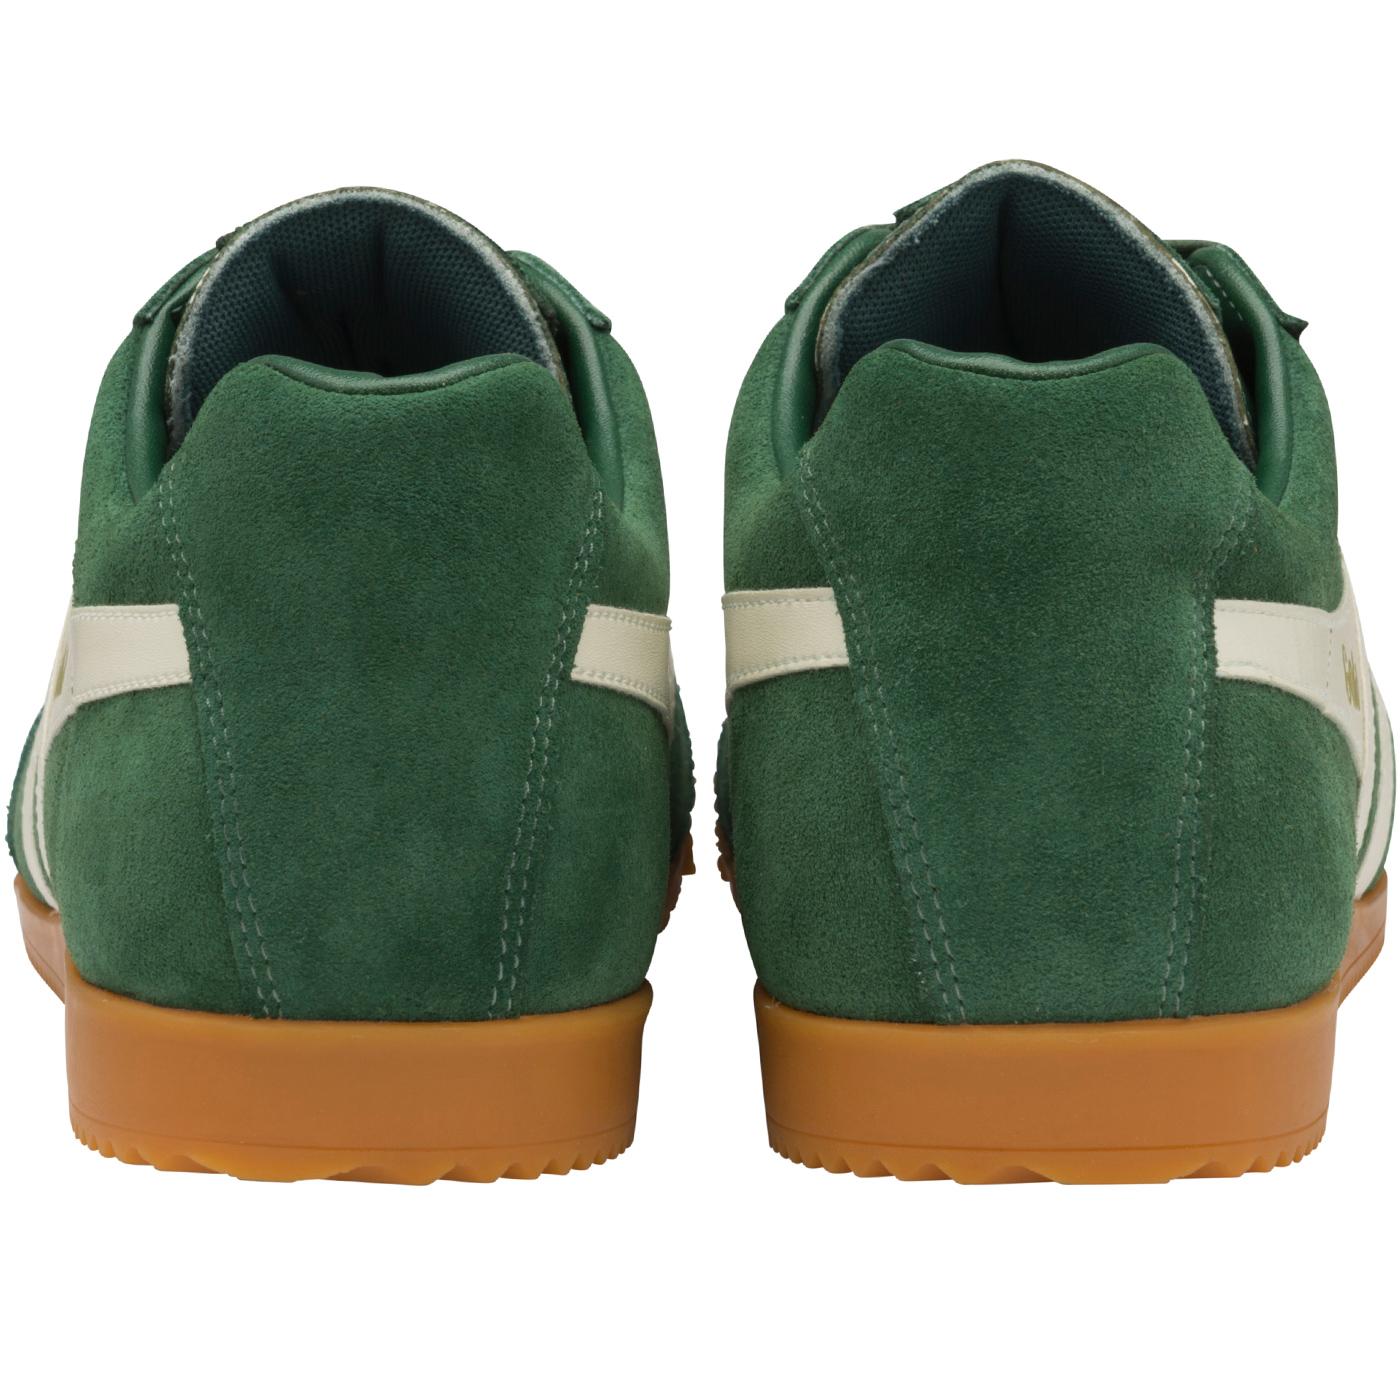 GOLA Harrier Suede Mens Retro 1970s Trainers in Evergreen